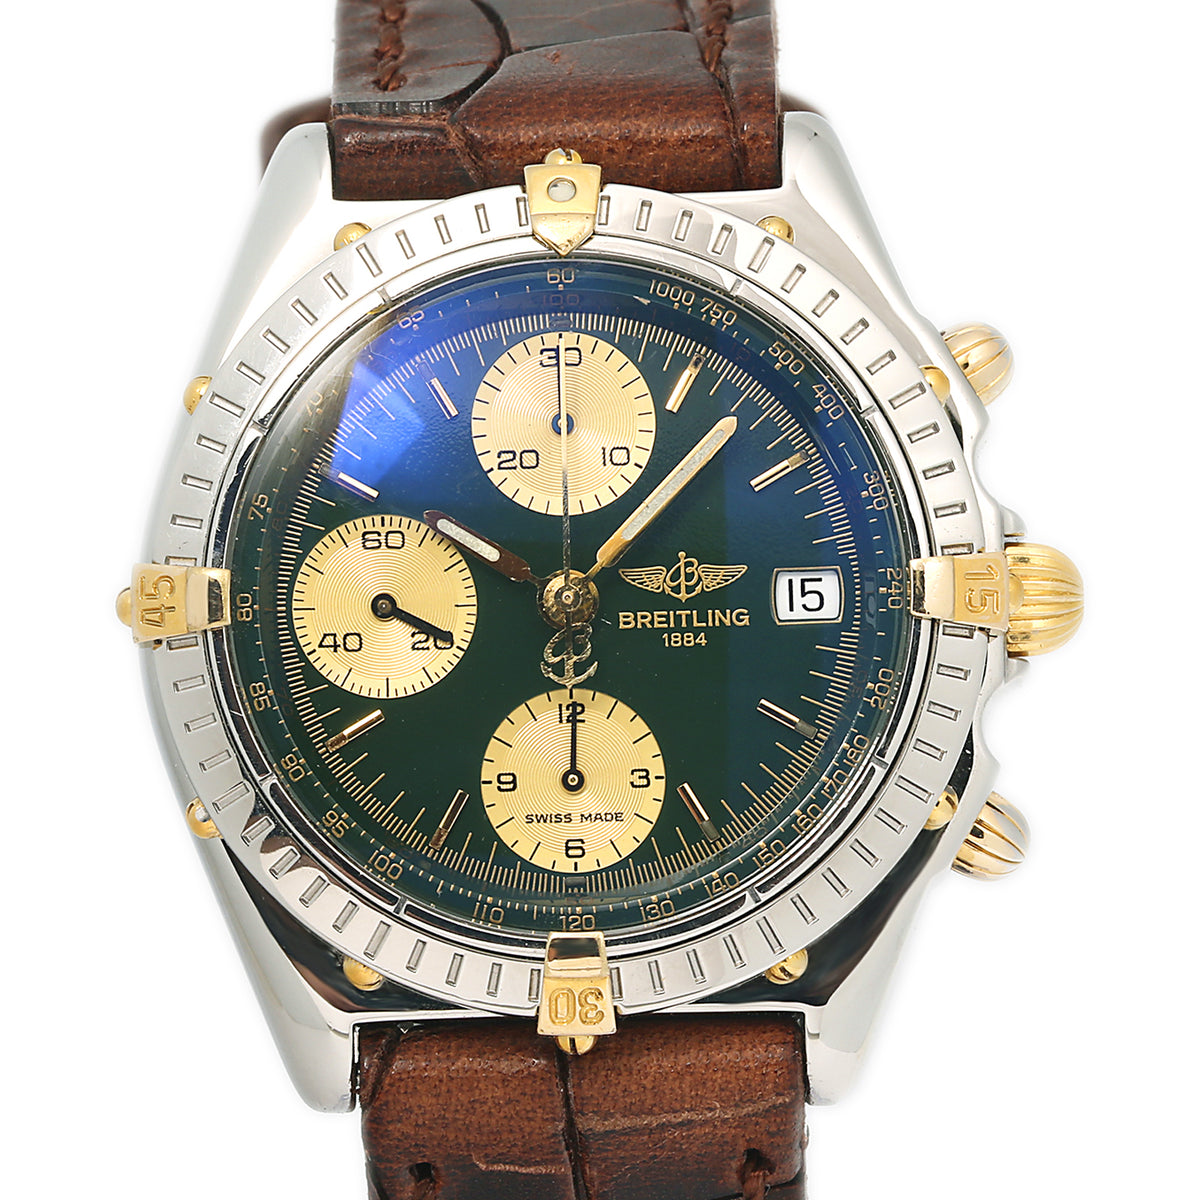 Breitling Chronomat B13050 18k Yellow Gold Steel Green Dial Automatic Watch 39mm